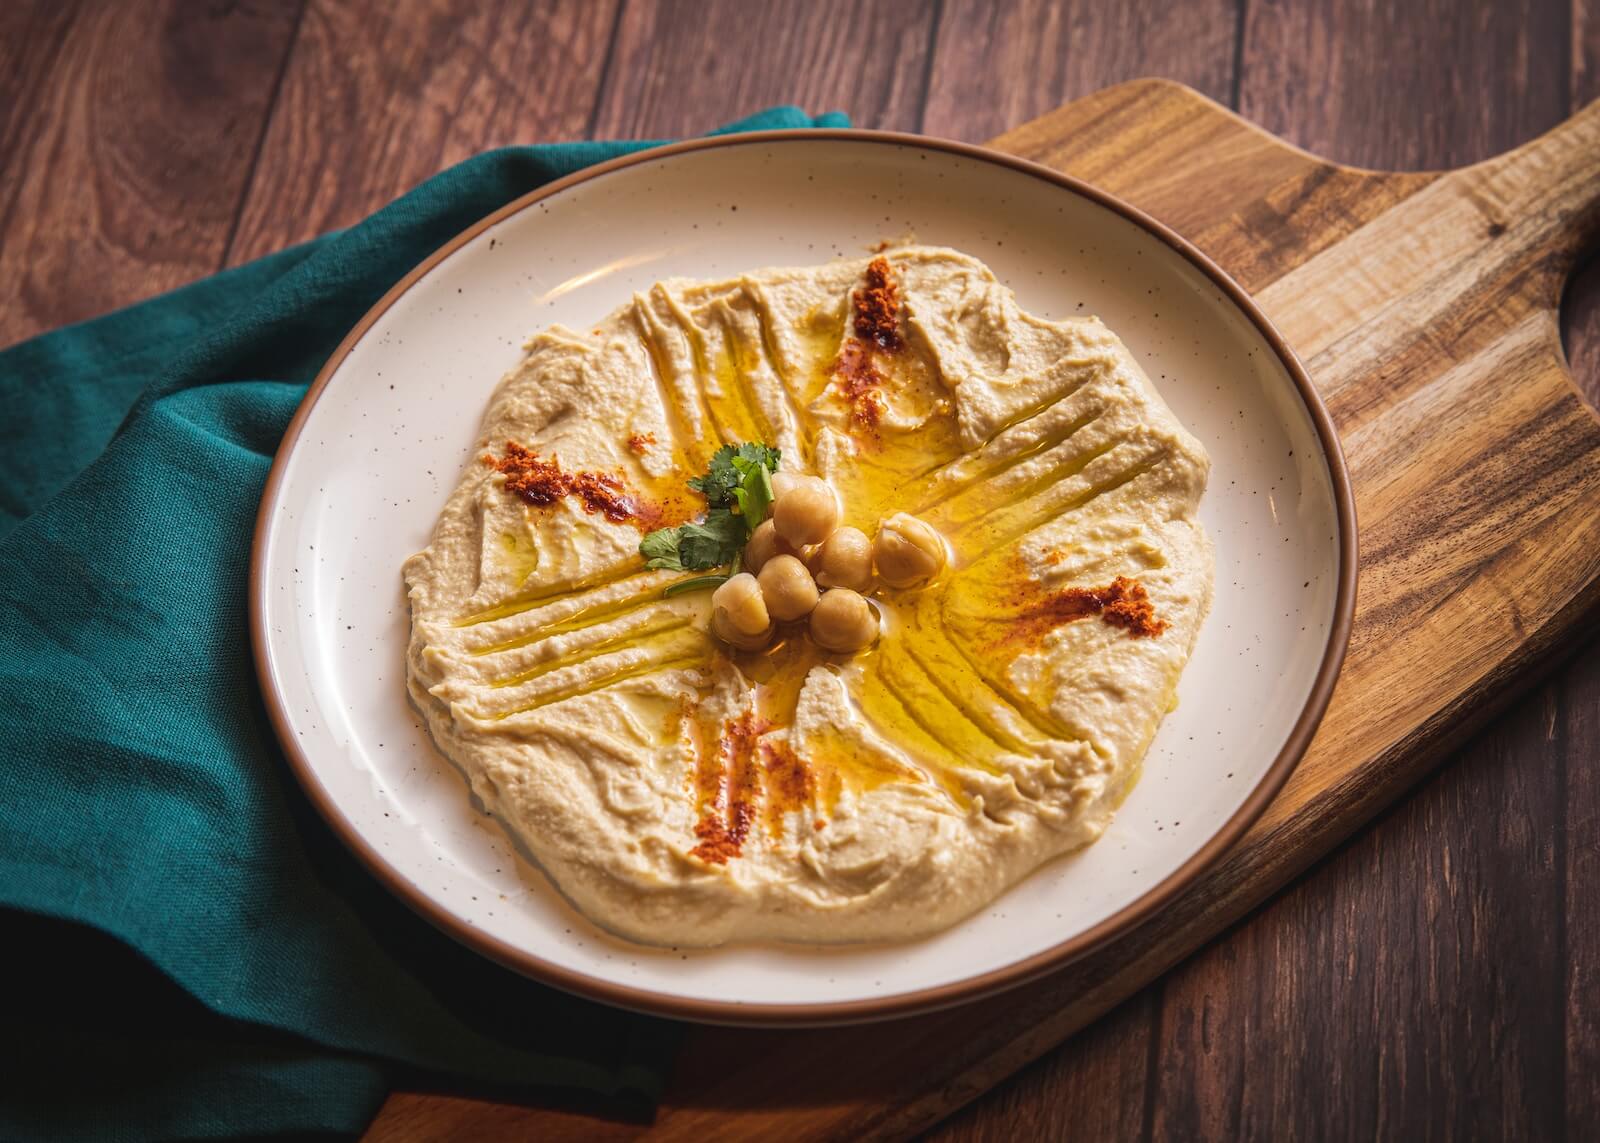 A plate of hummus